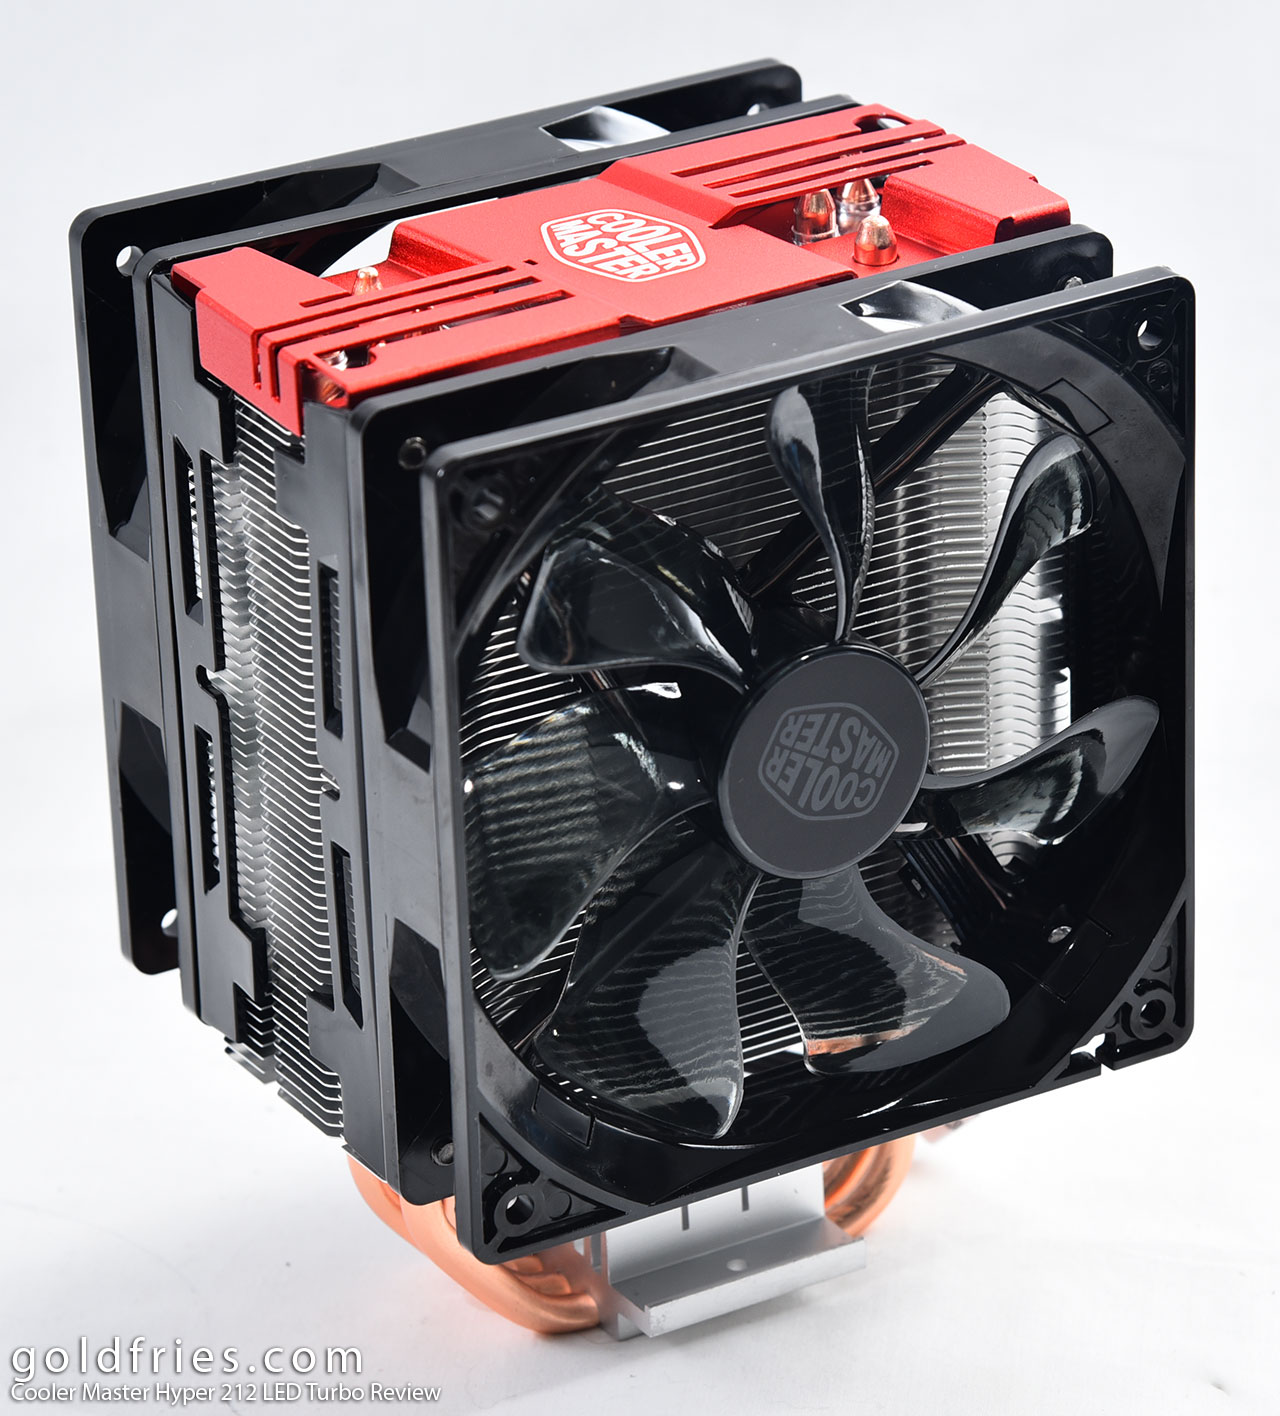 Cooler Master Hyper 212 LED Turbo Review – goldfries